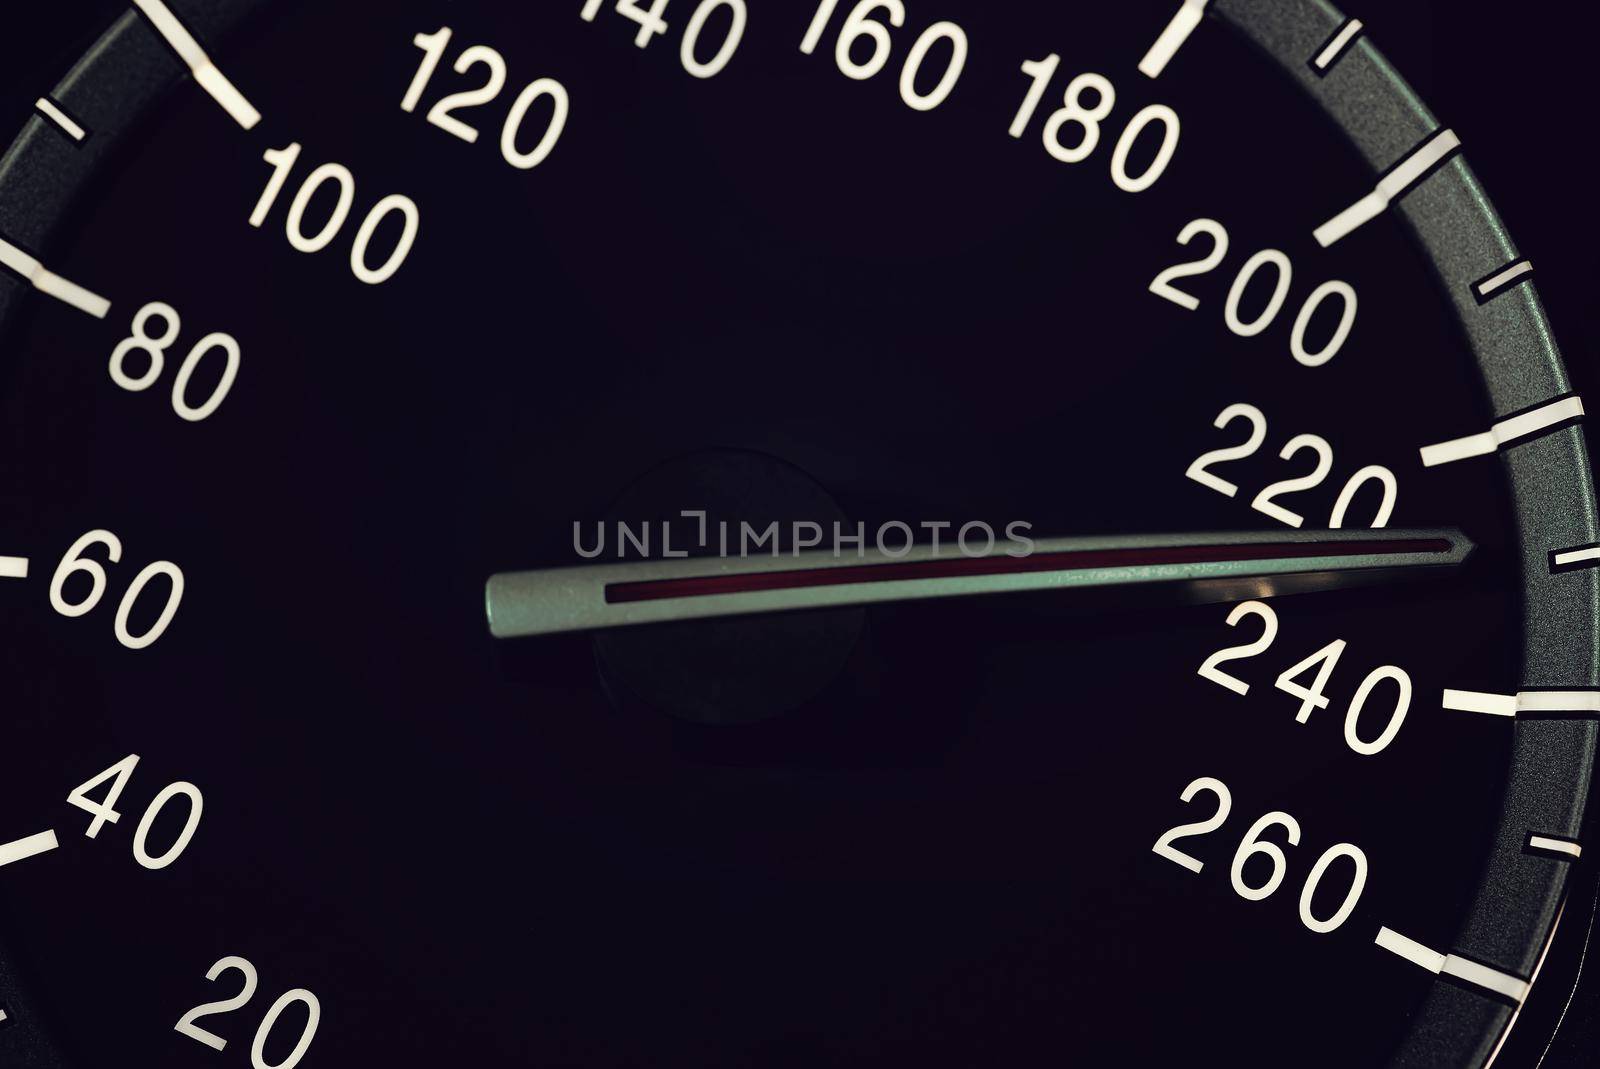 Detail of needle of odometer or speedometer of a car 6 by pippocarlot